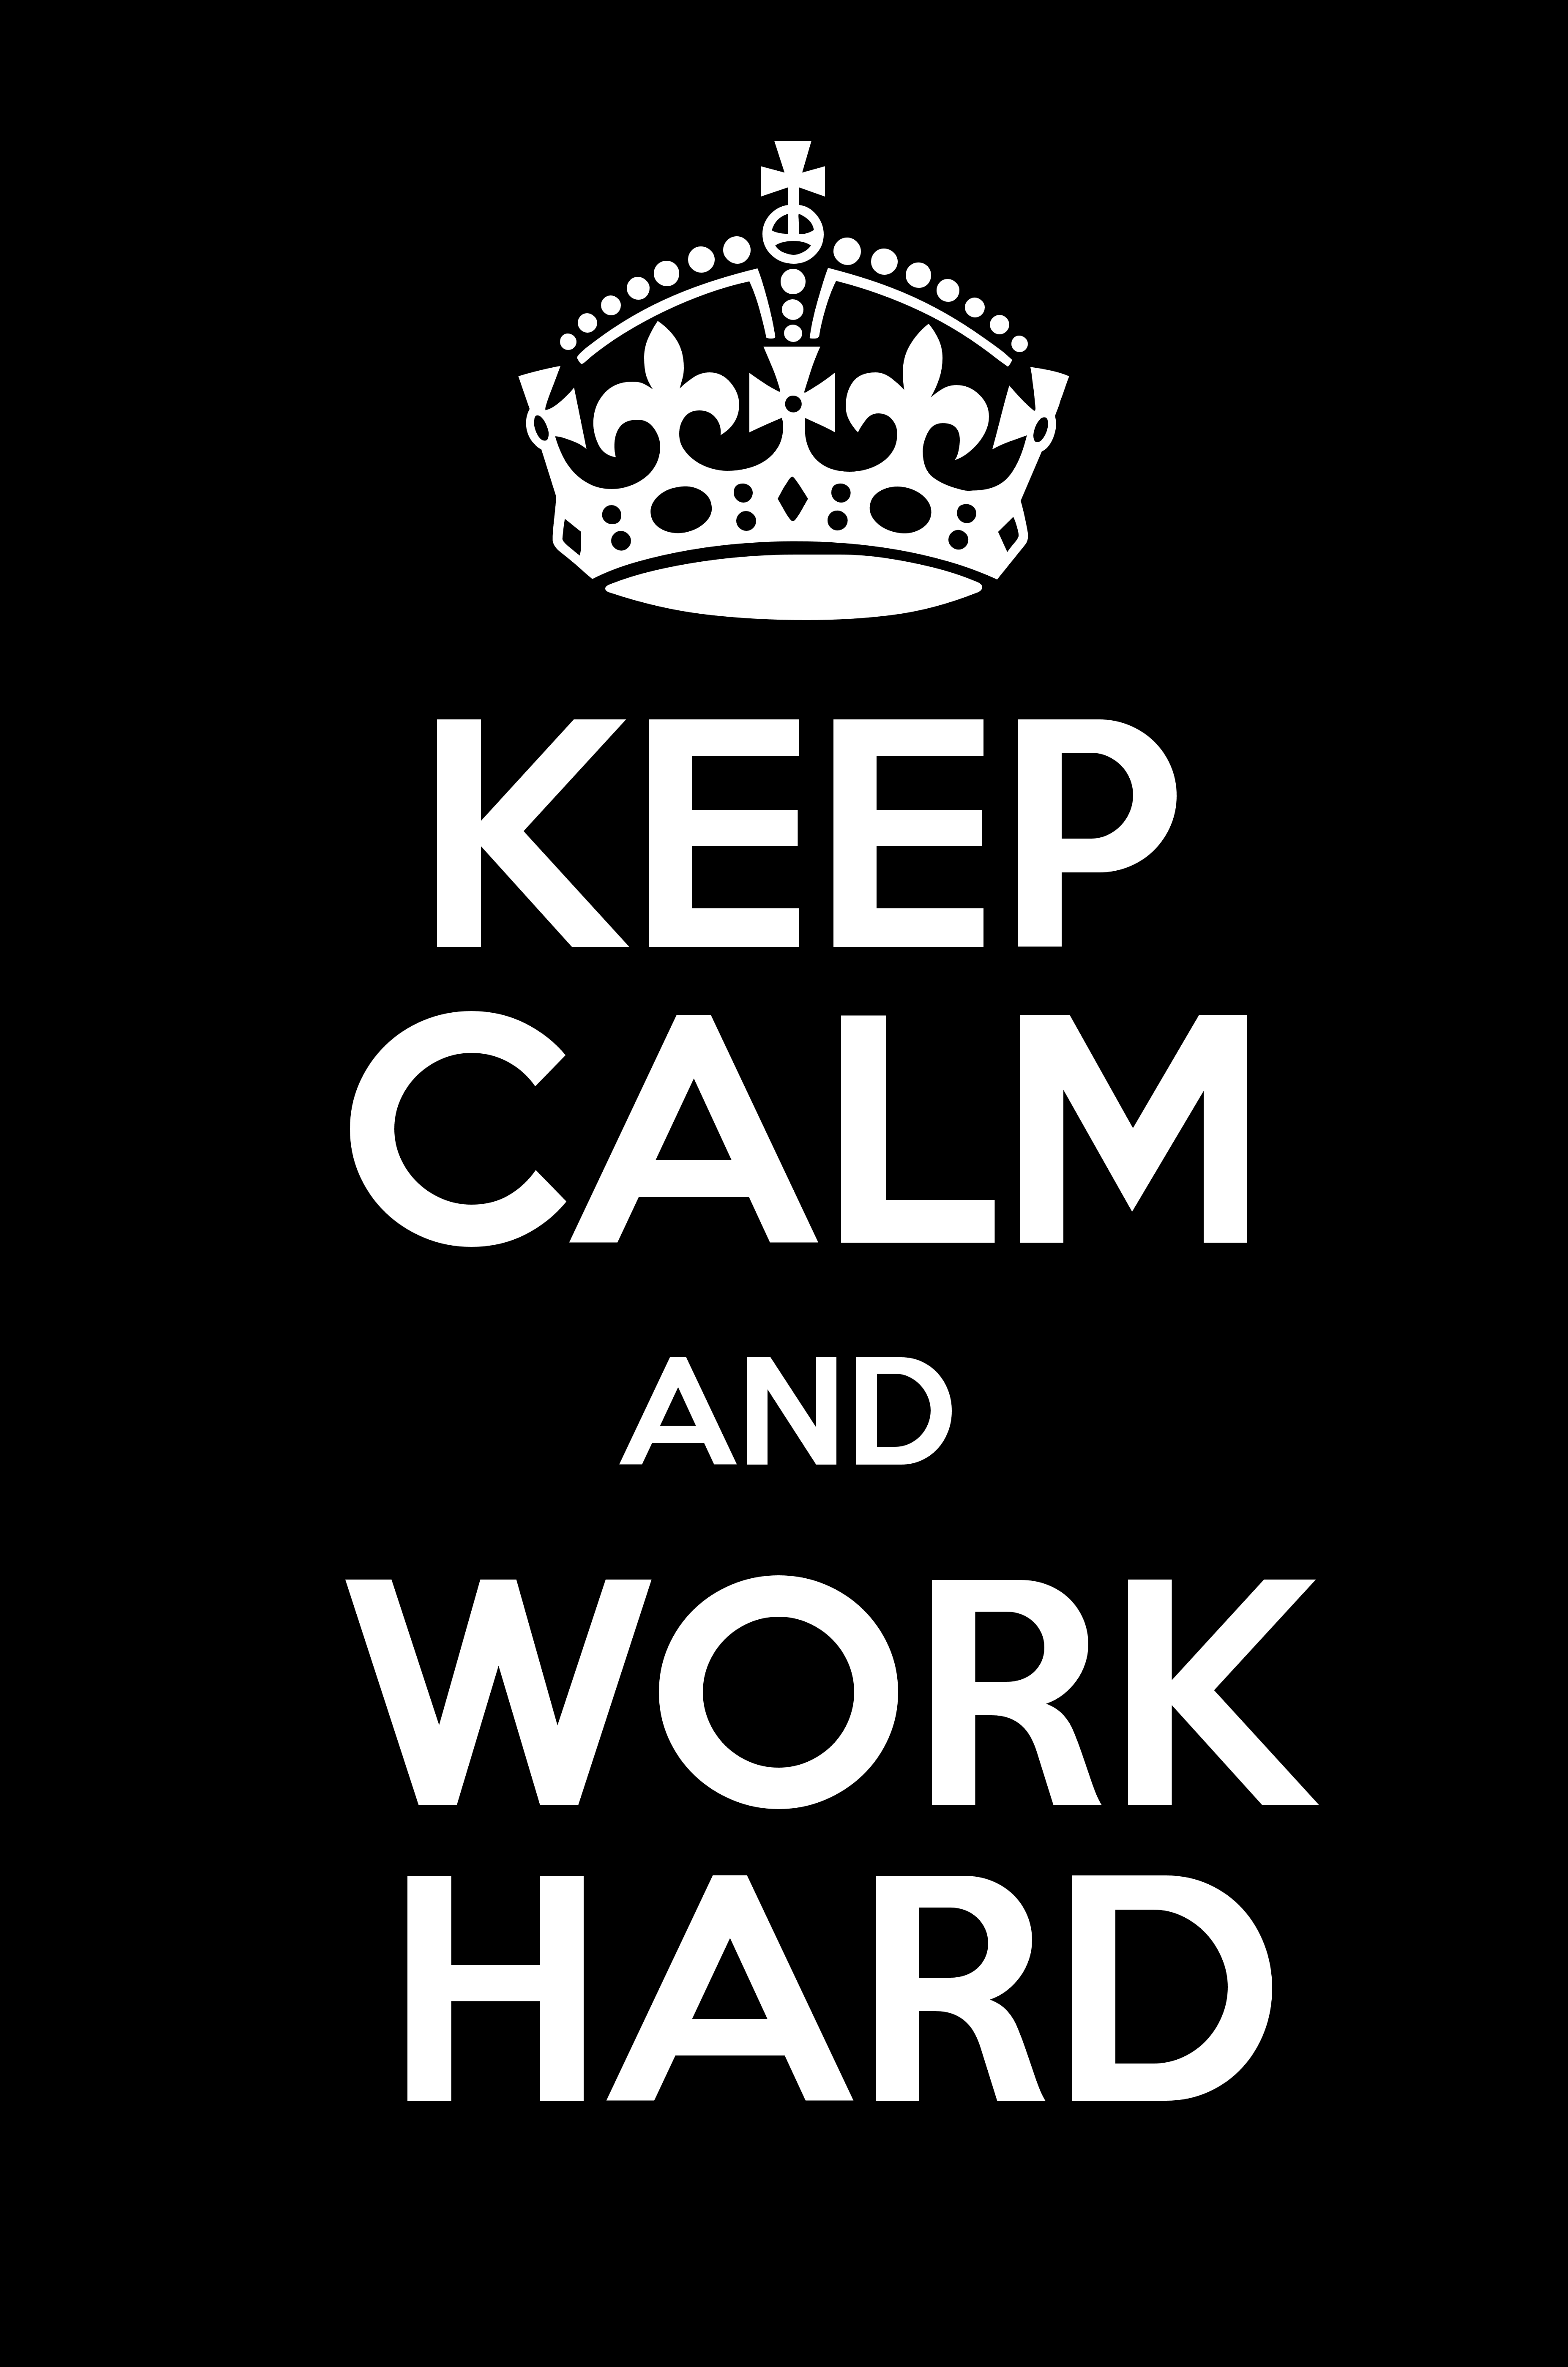 KEEP CALM AND WORK HARD - Keep Calm and Posters Generator, Maker For ...